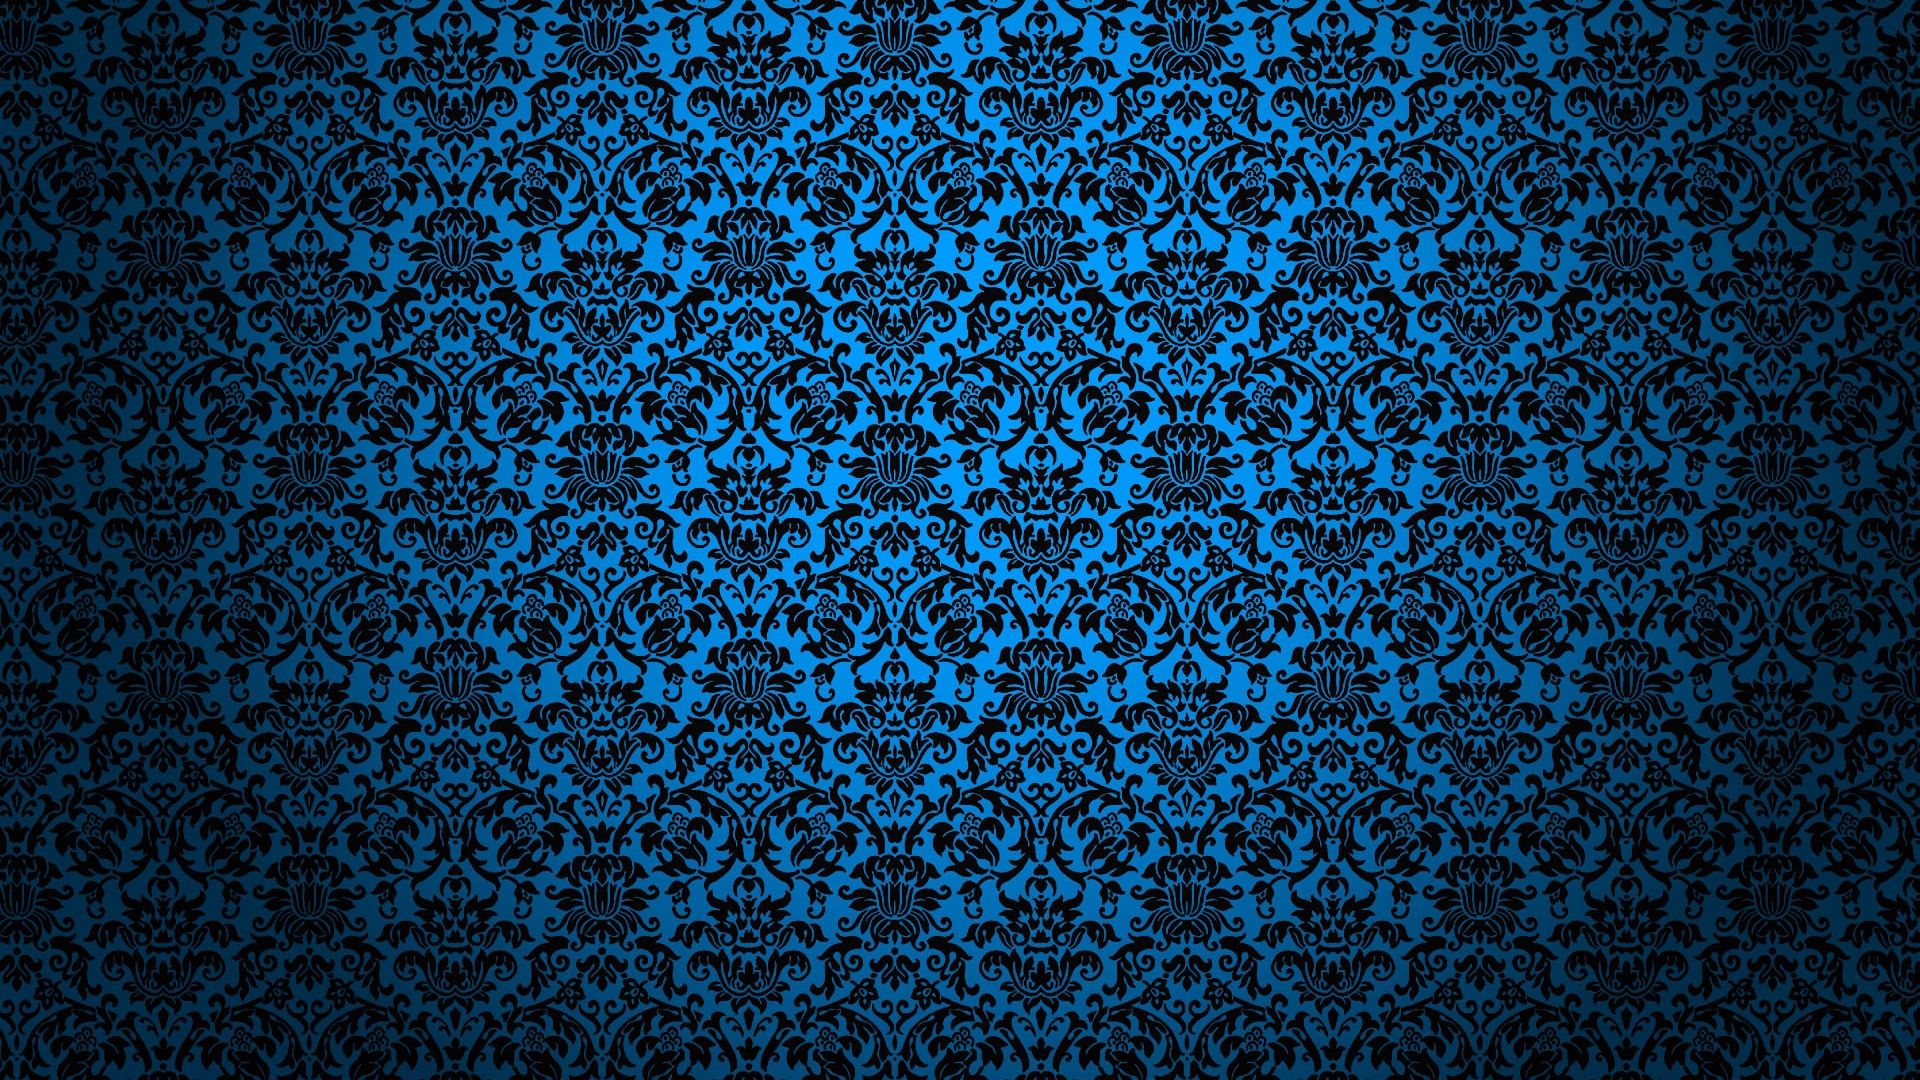 Patterns, Shadow, Symmetry, Texture Wallpapers Full Hd, Hdtv, Fhd, P 